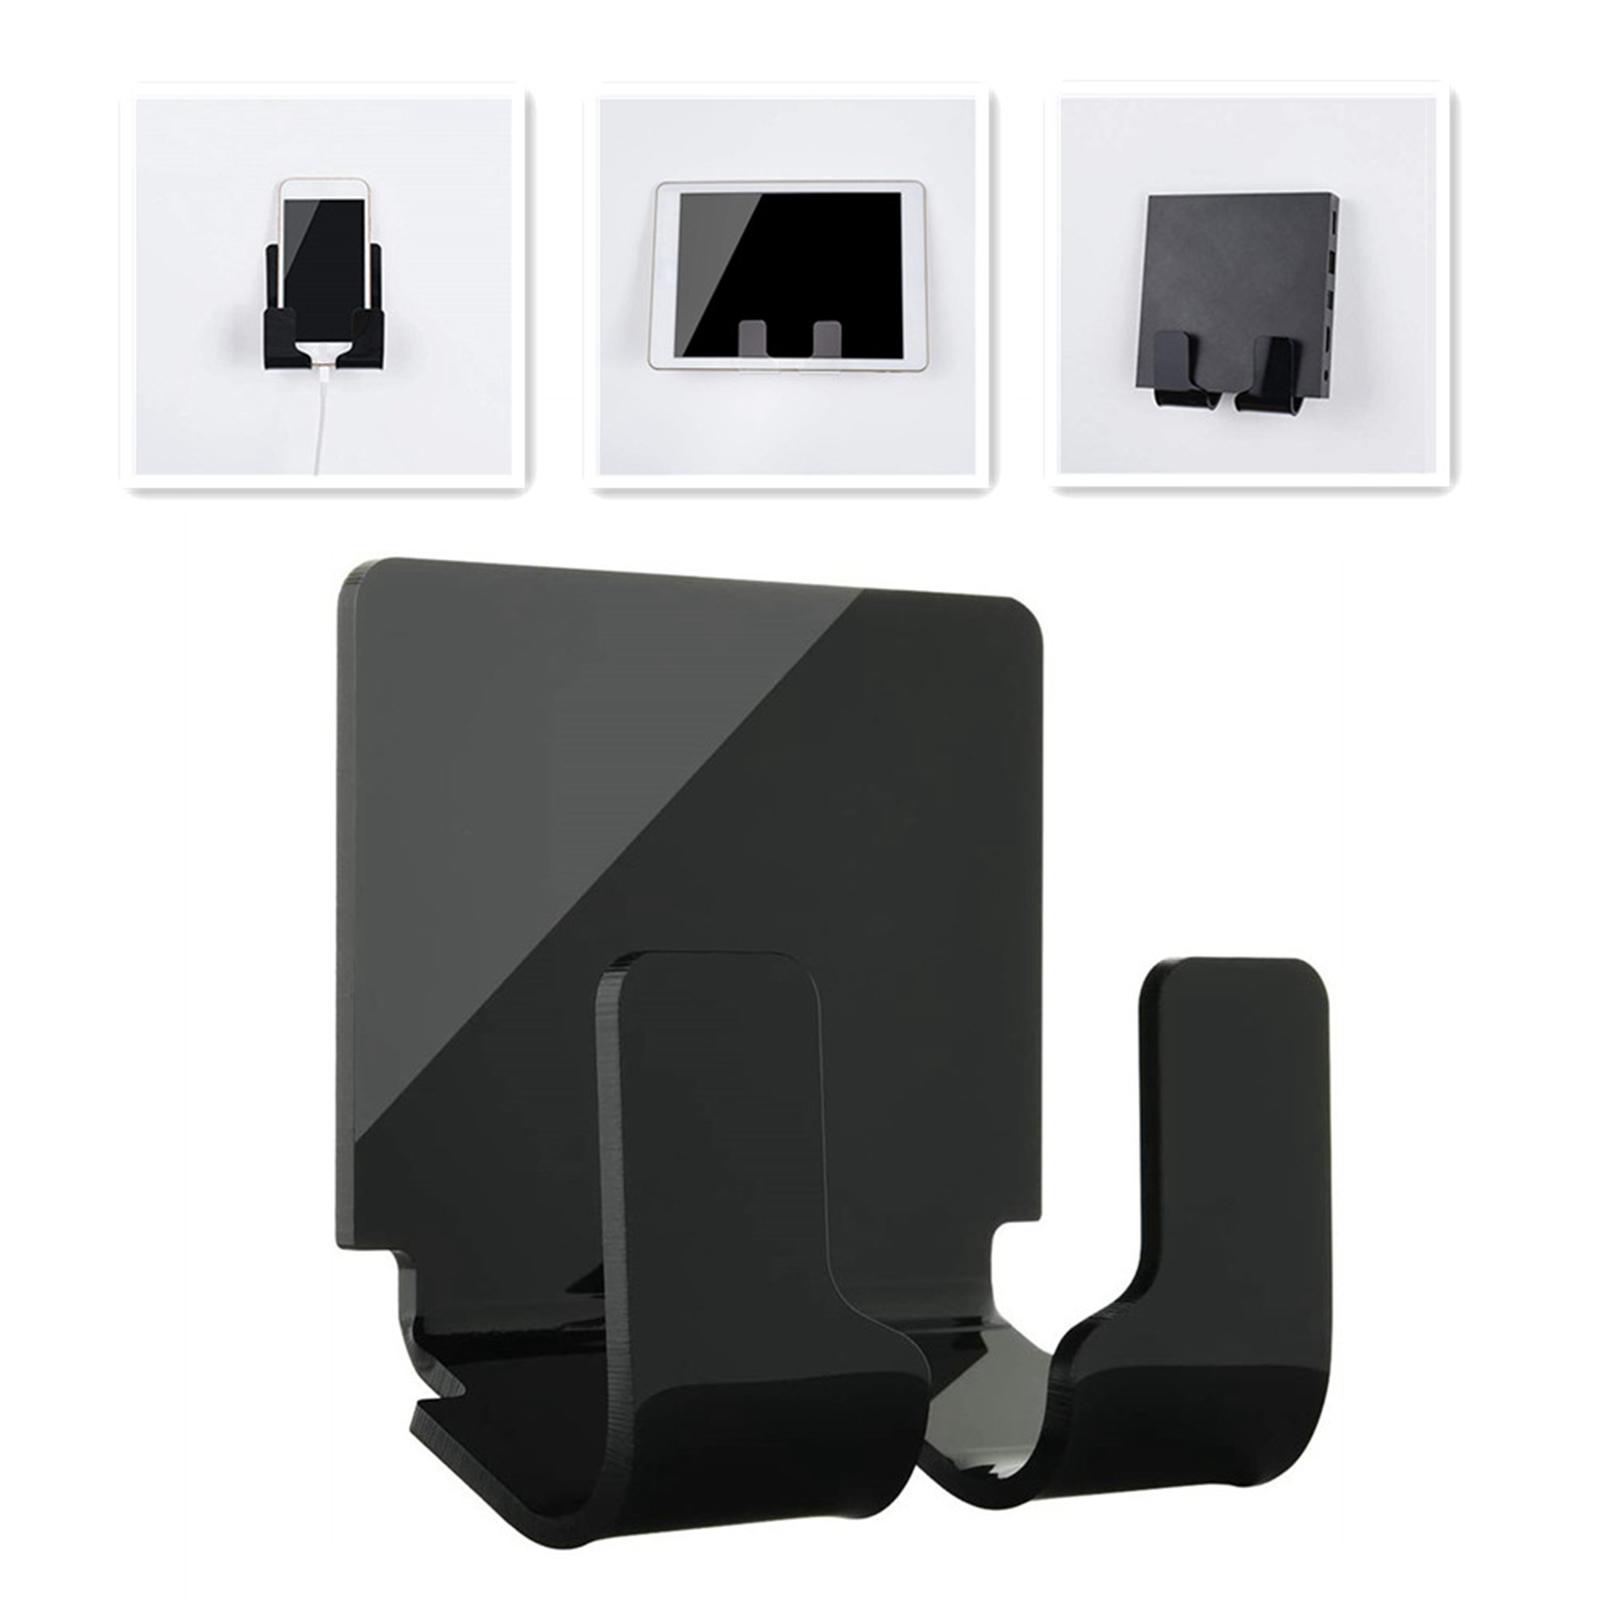 1pc Adhesive Mobile Phone Wall Charger Holder Wall Charger Hook Universal Cellphone Hanging Stand for Home Office Bedside Bracket